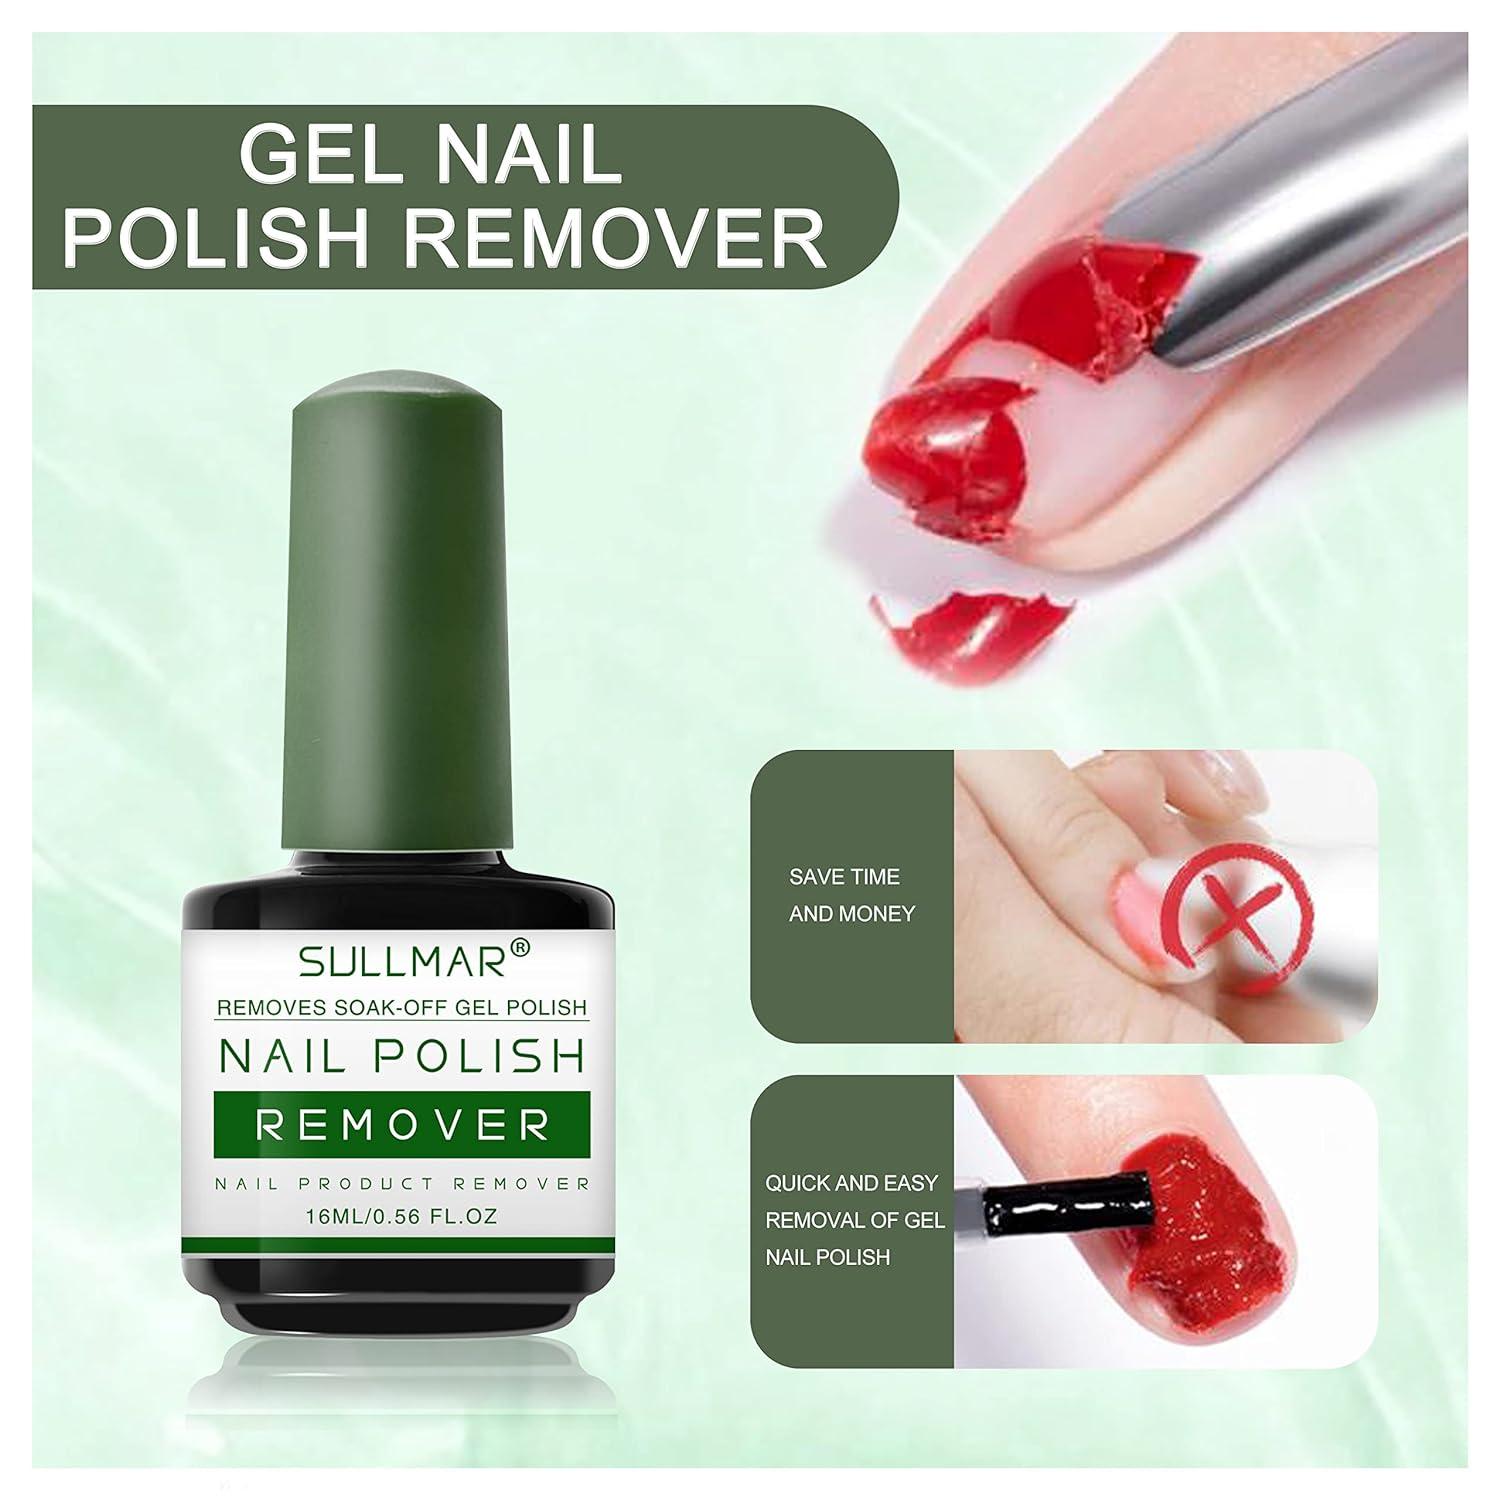 Magic Remover Gel Nail Polish Remover Within 2-3 Min Peel off Varnishes  without Soak off Remover Tools (15ml - Remover Gel)